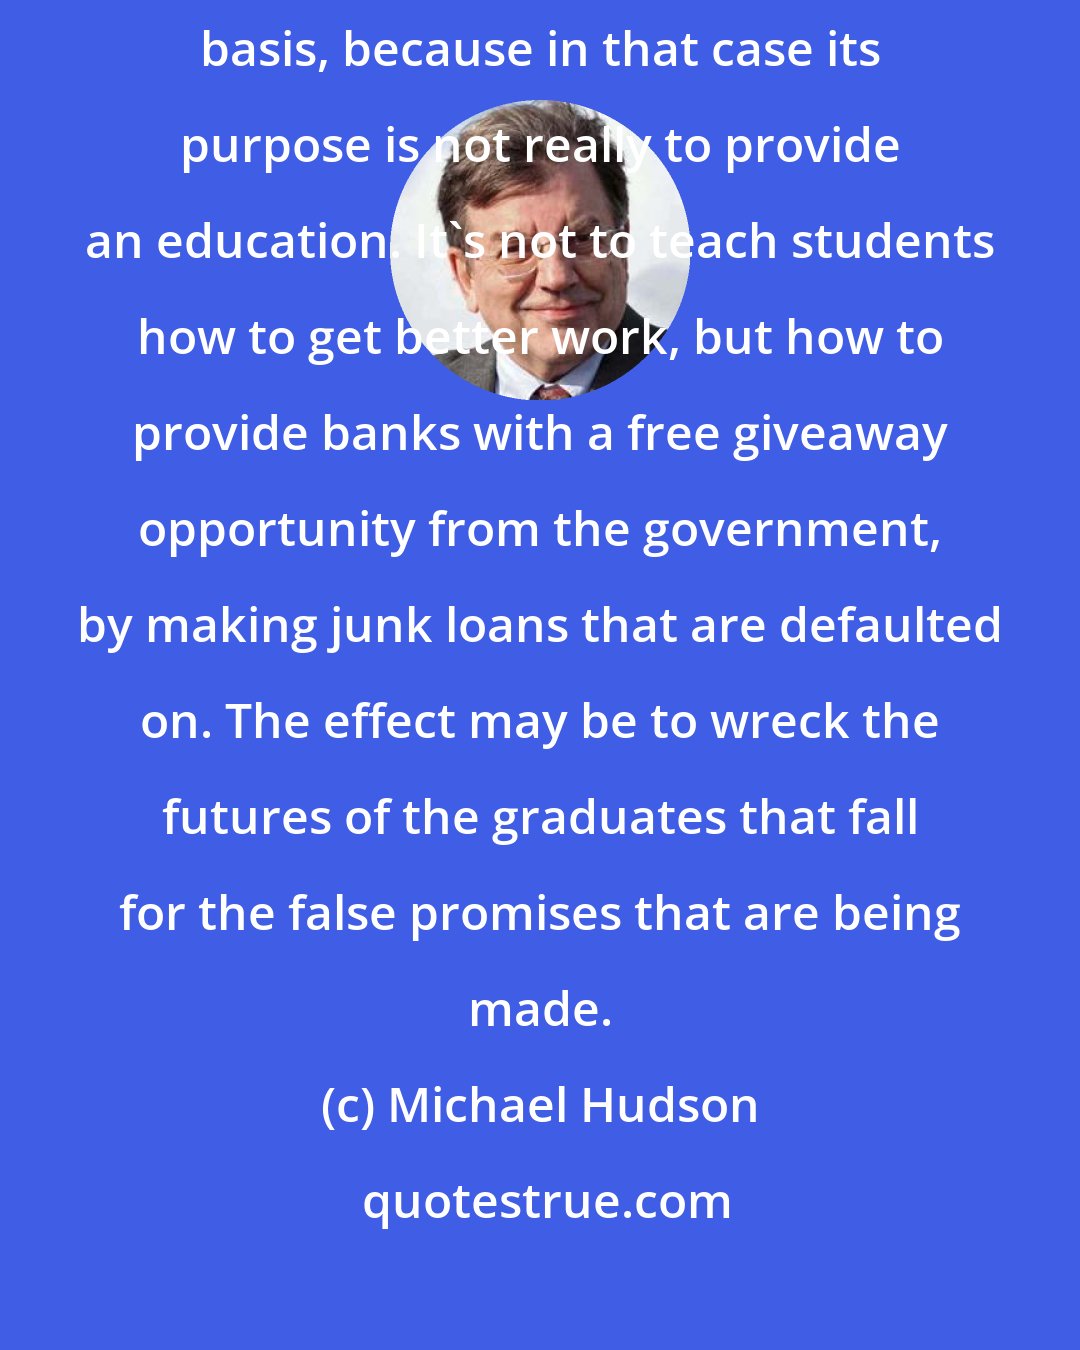 Michael Hudson: Education is something that should not be organized on a for-profit basis, because in that case its purpose is not really to provide an education. It's not to teach students how to get better work, but how to provide banks with a free giveaway opportunity from the government, by making junk loans that are defaulted on. The effect may be to wreck the futures of the graduates that fall for the false promises that are being made.